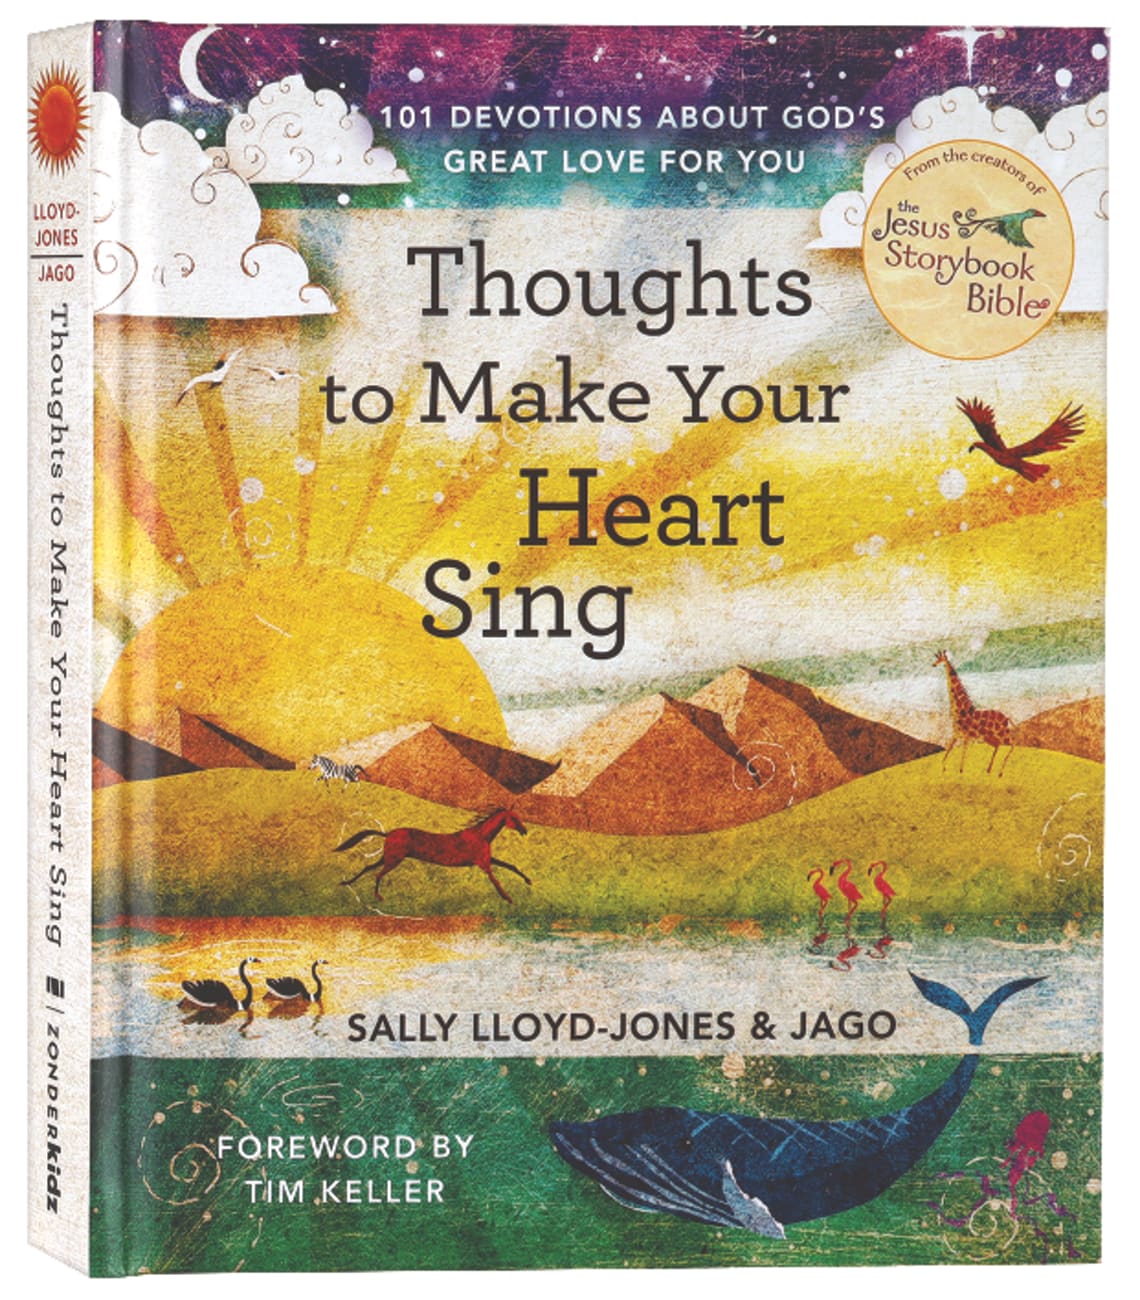 THOUGHTS TO MAKE YOUR HEART SING: 101 DEVOTIONS ABOUT GOD'S GREAT LOV